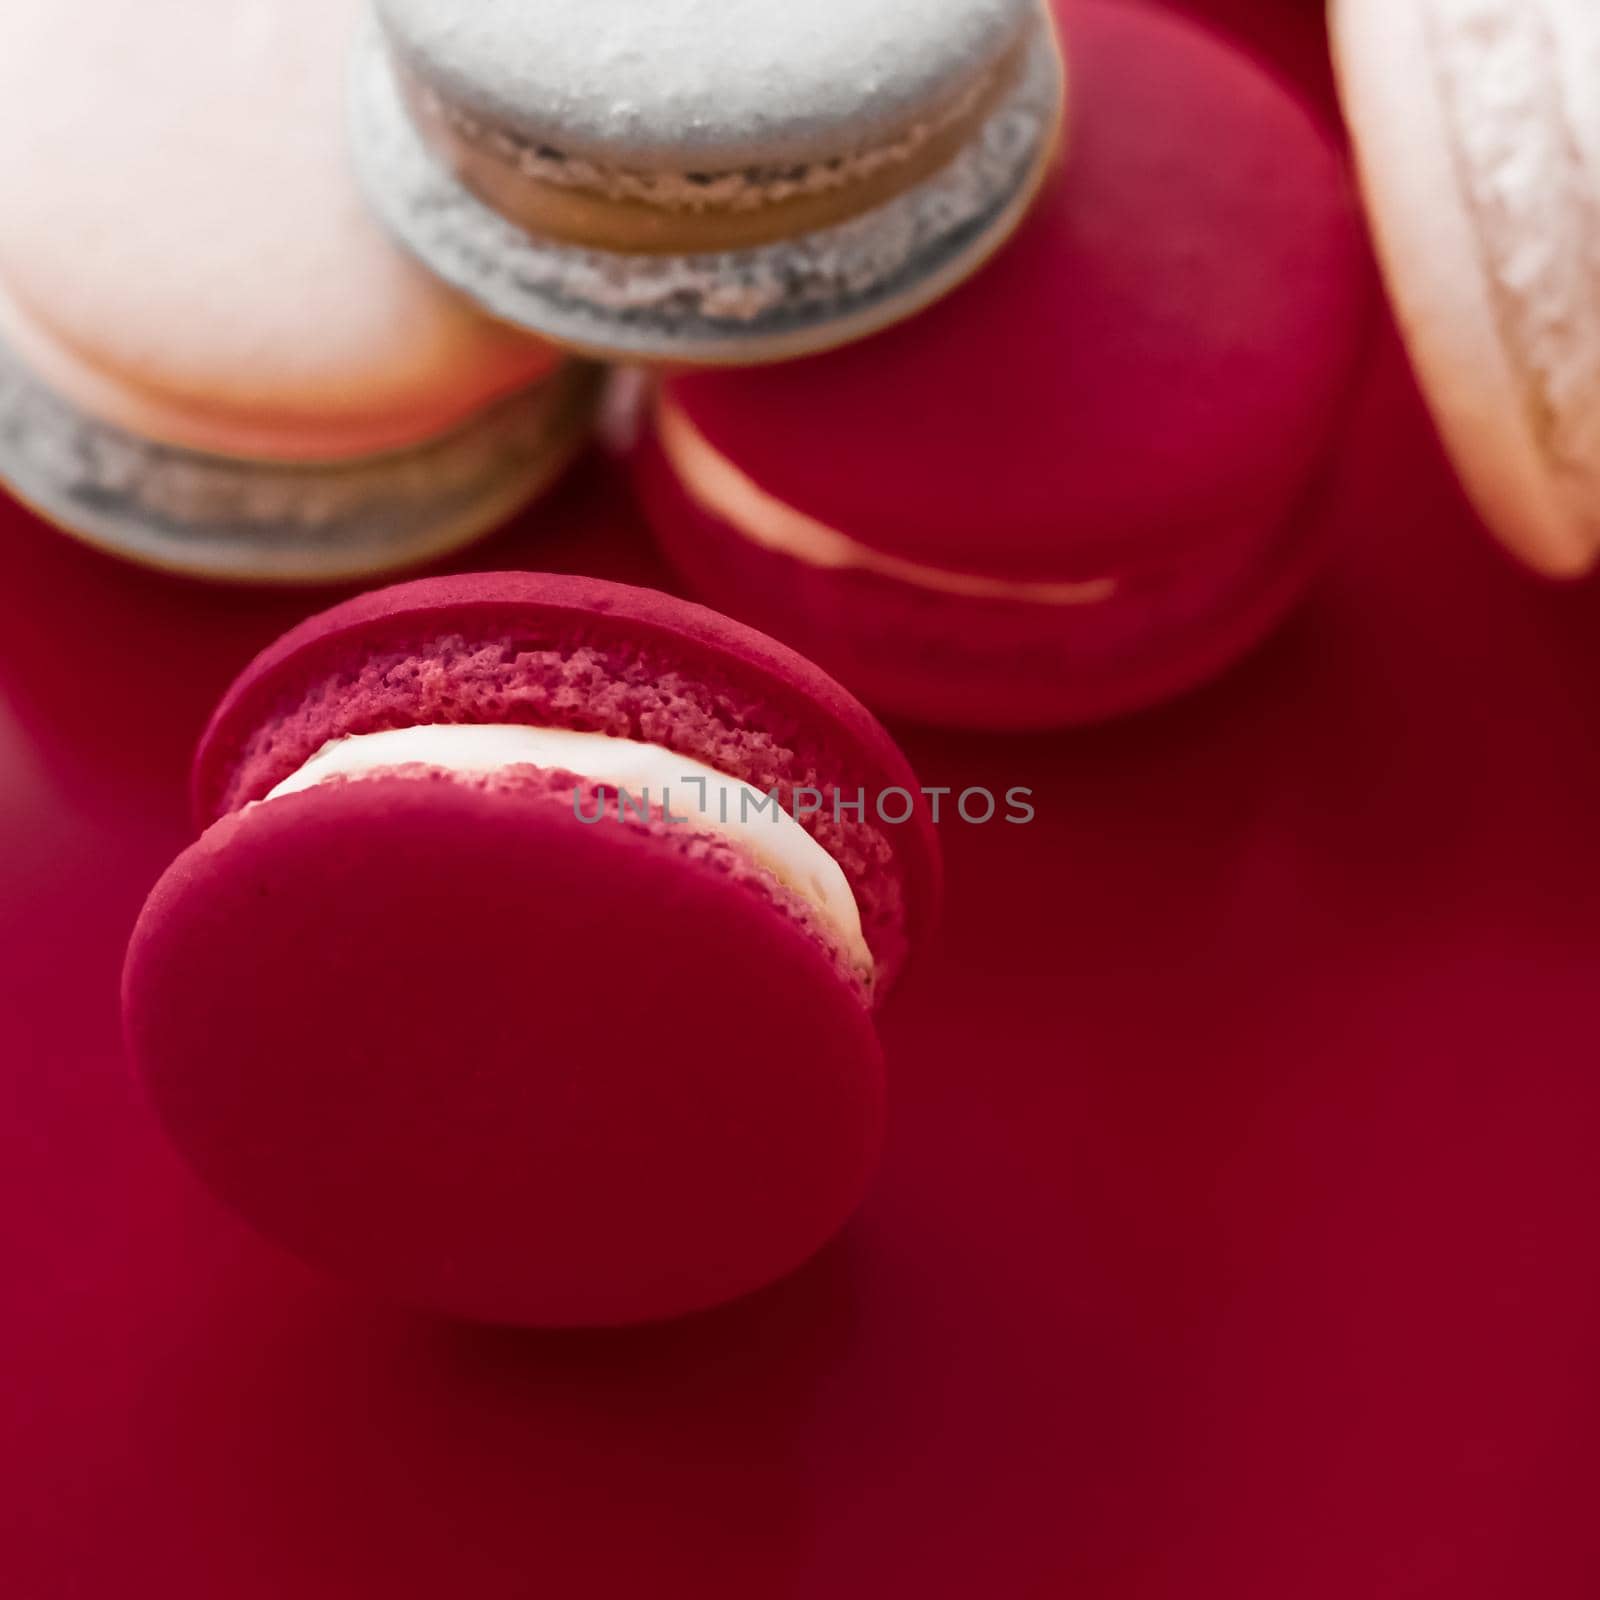 French macaroons on wine red background, parisian chic cafe dessert, sweet food and cake macaron for luxury confectionery brand, holiday backdrop design by Anneleven